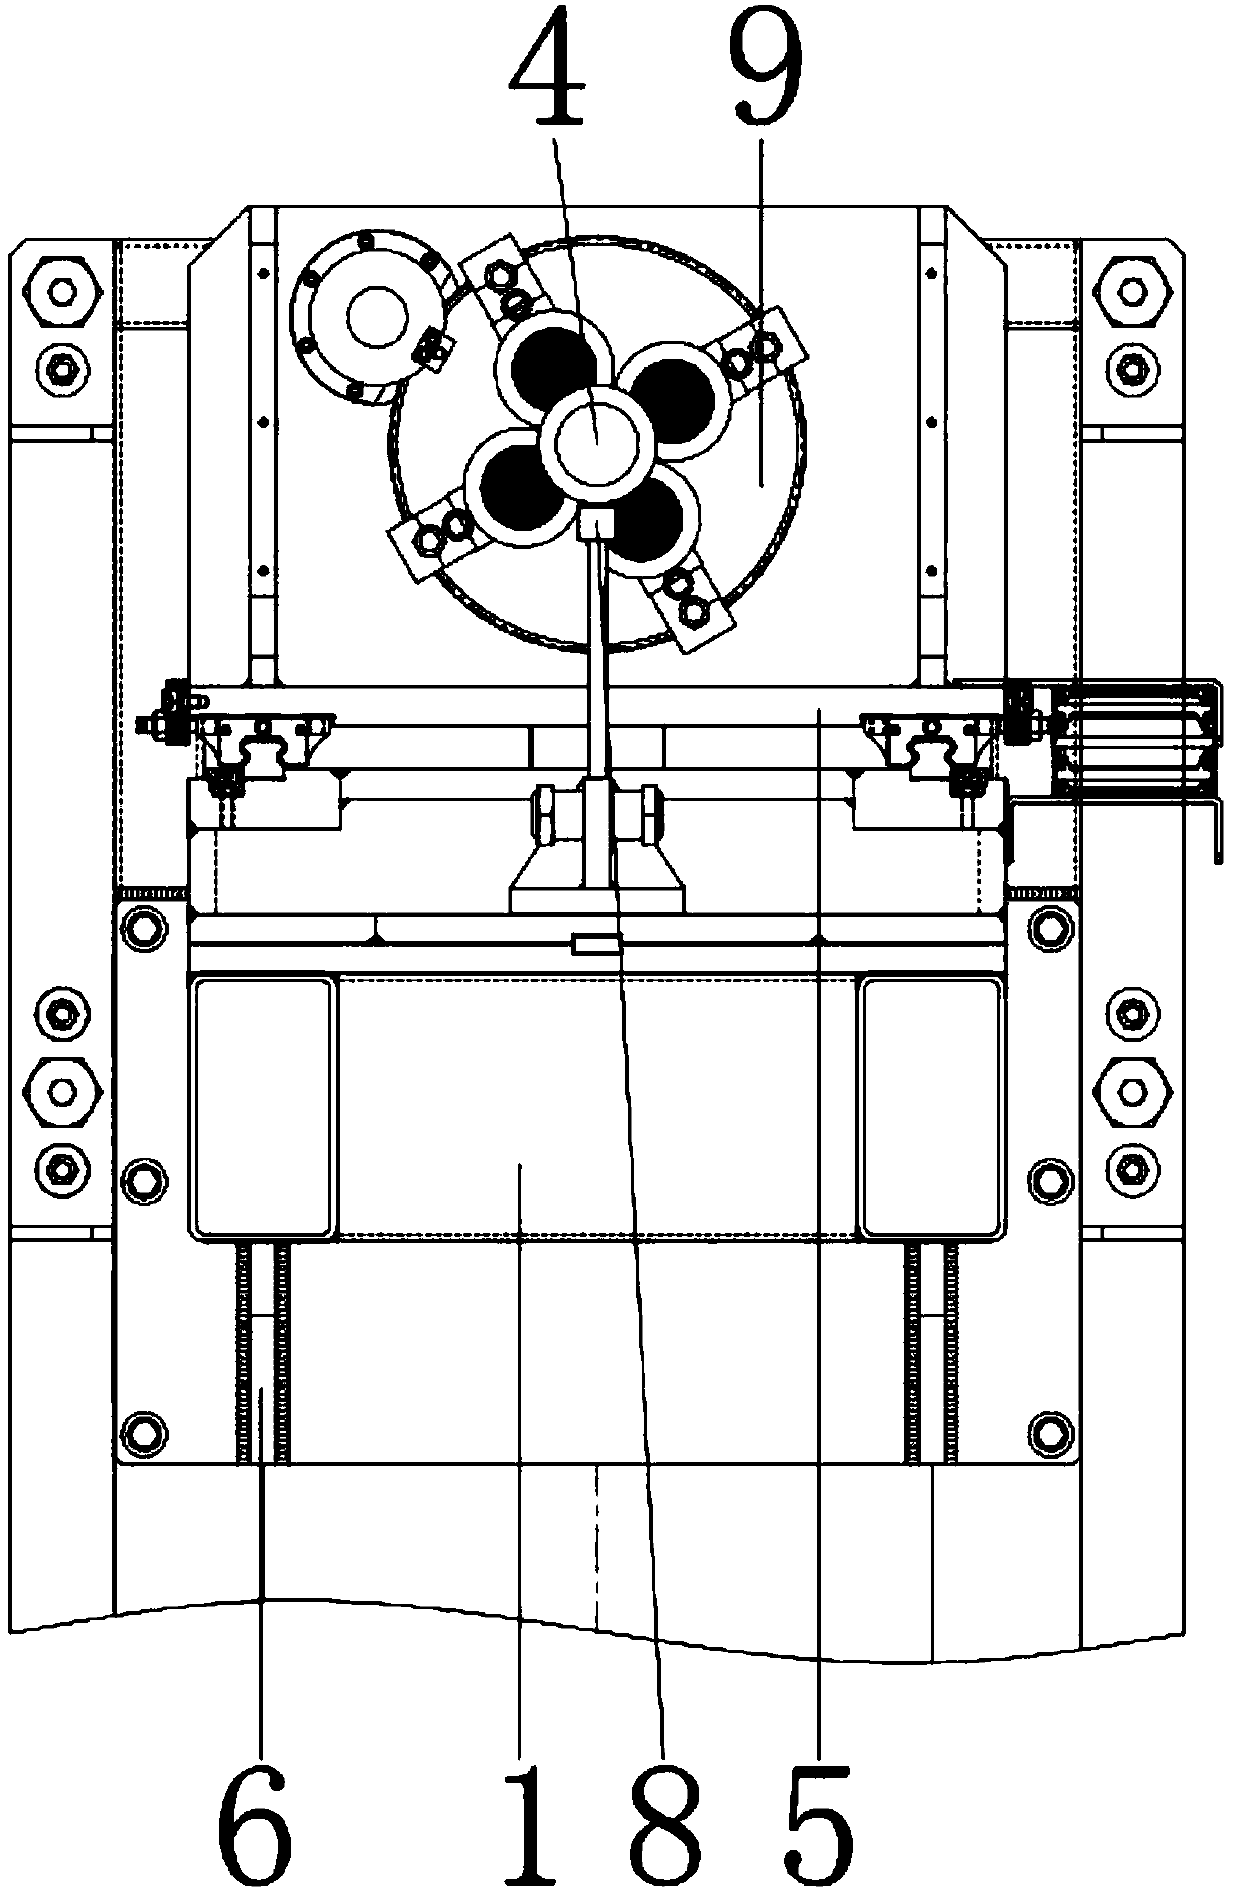 A stainless steel wire variable diameter processing equipment